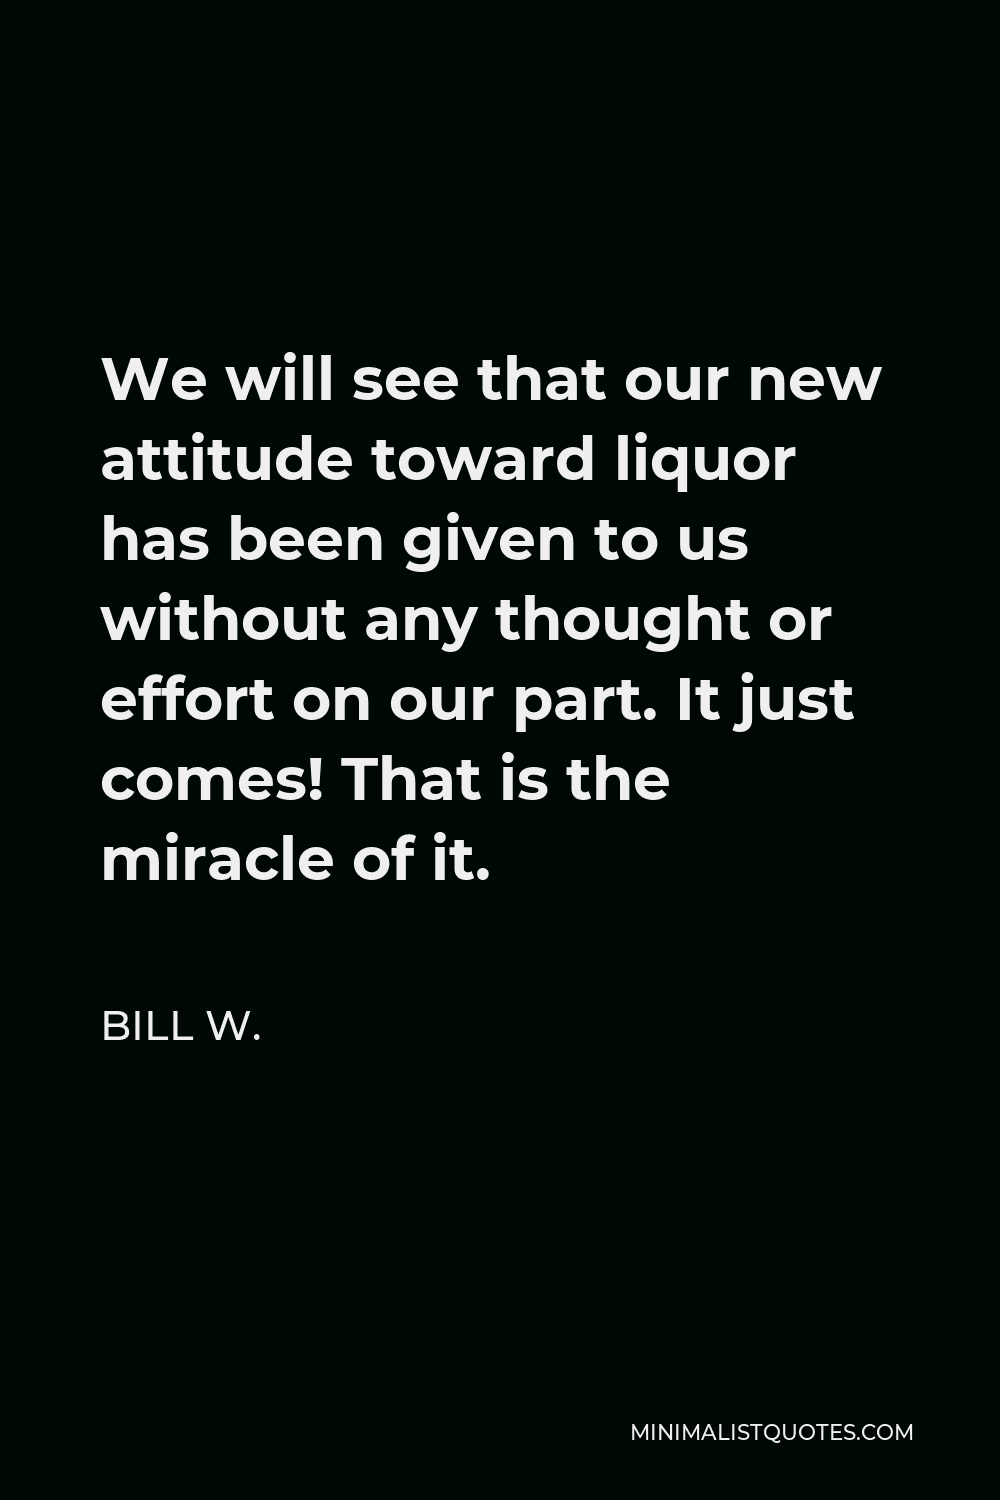 Bill W. Quote - We will see that our new attitude toward liquor has been given to us without any thought or effort on our part. It just comes! That is the miracle of it.